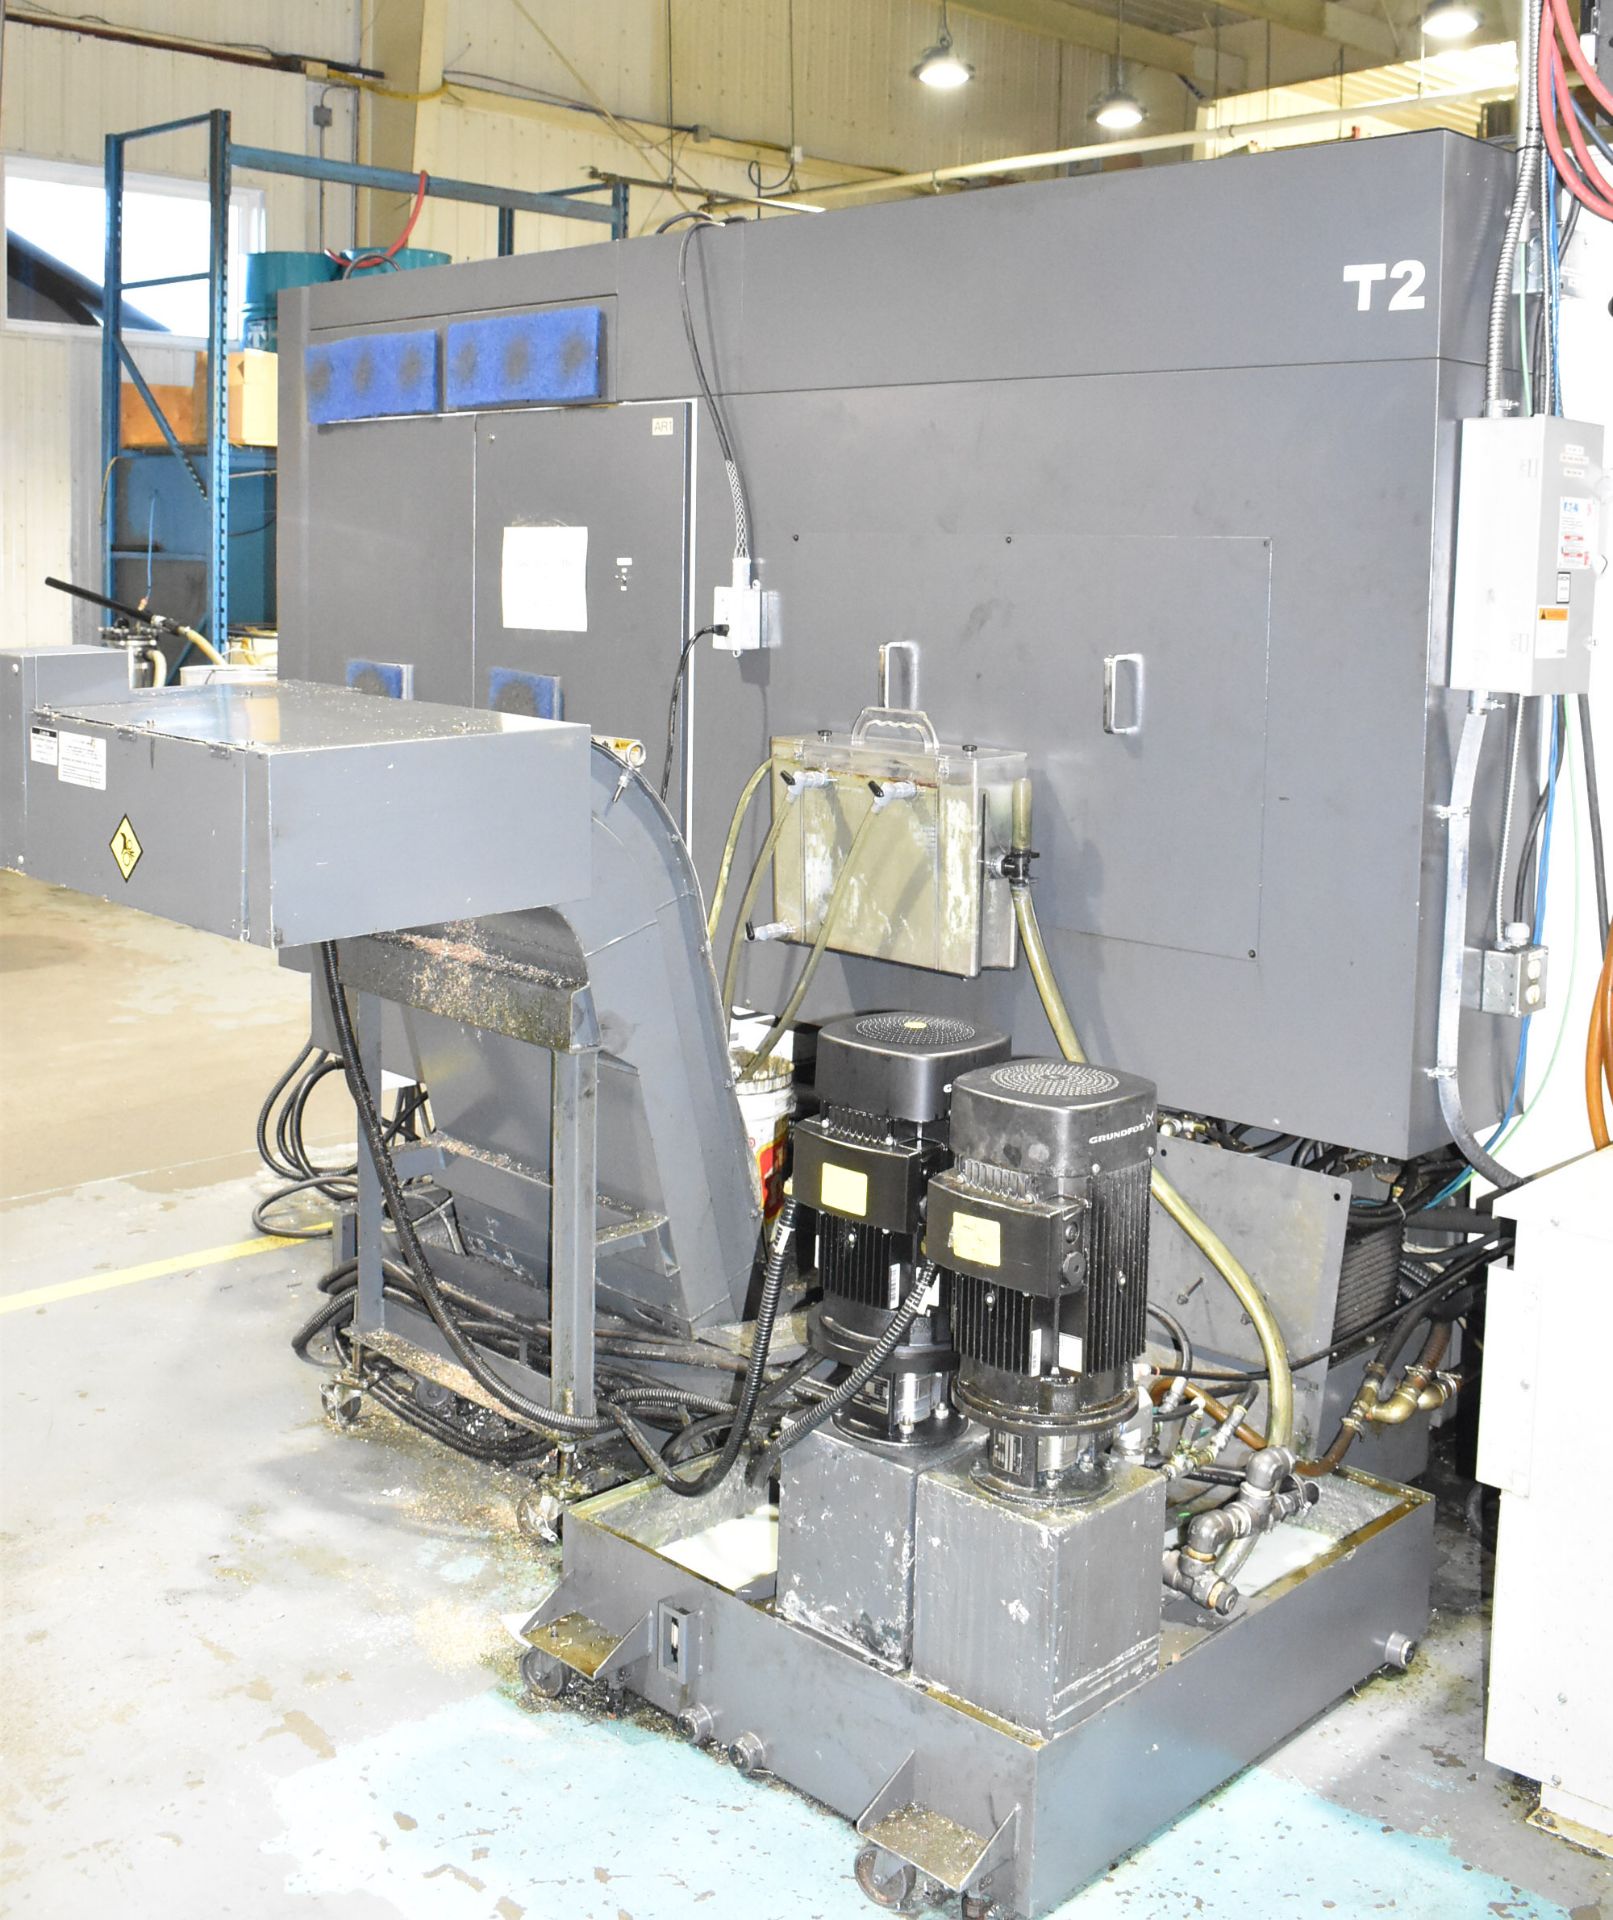 NAKAMURA-TOME WT-250 II MULTI-AXIS OPPOSED SPINDLE AND TWIN TURRET CNC MULTI-TASKING CENTER WITH - Image 11 of 15